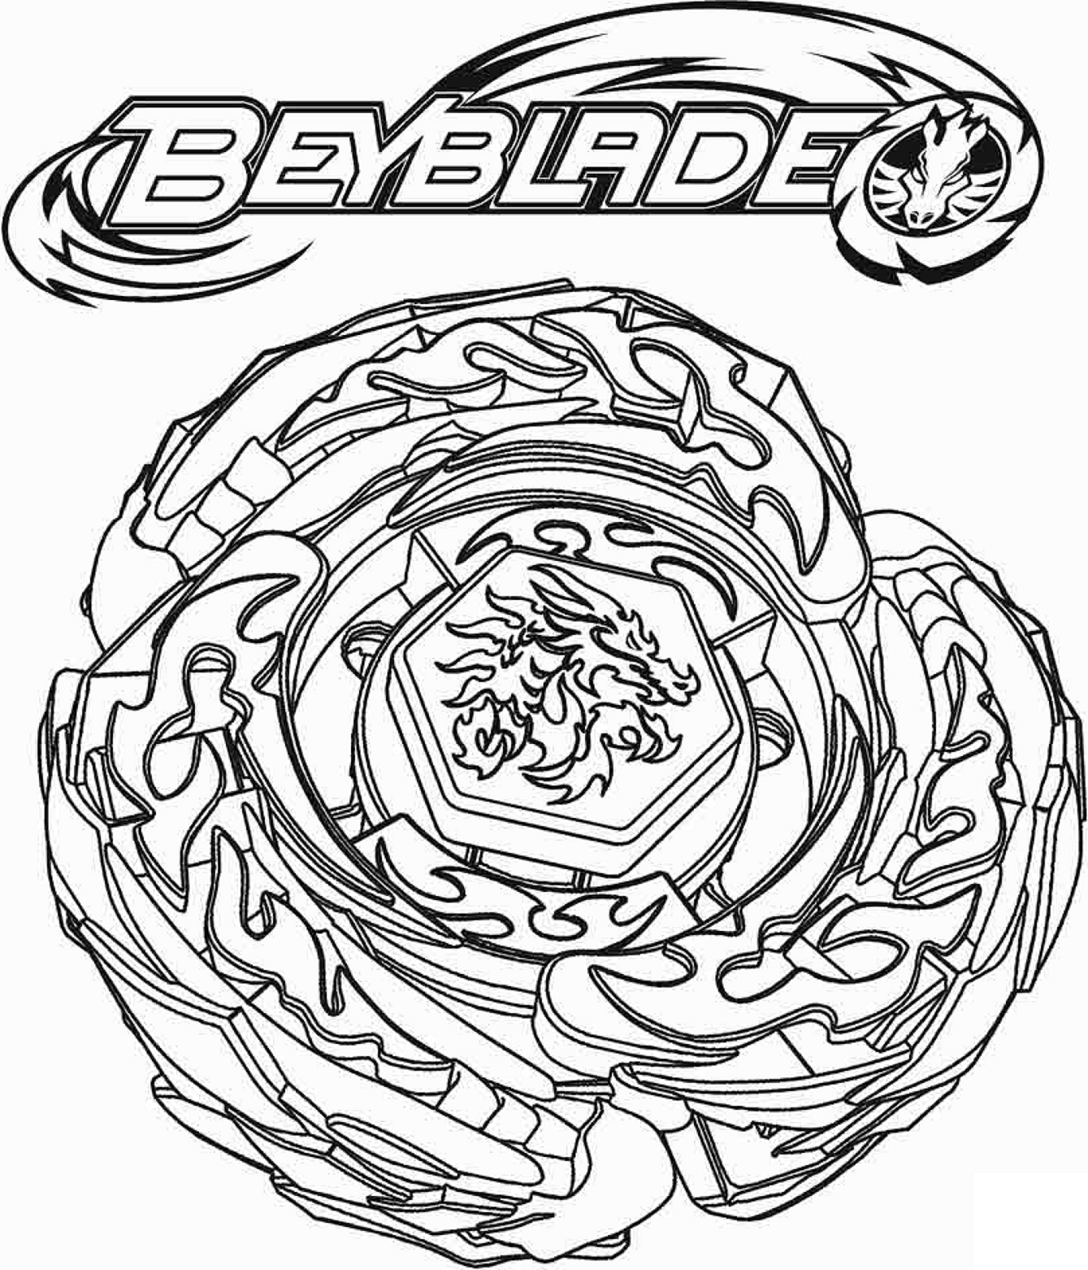 Beyblade Burst Coloring Pages Free Printable Coloring Pages For Kids